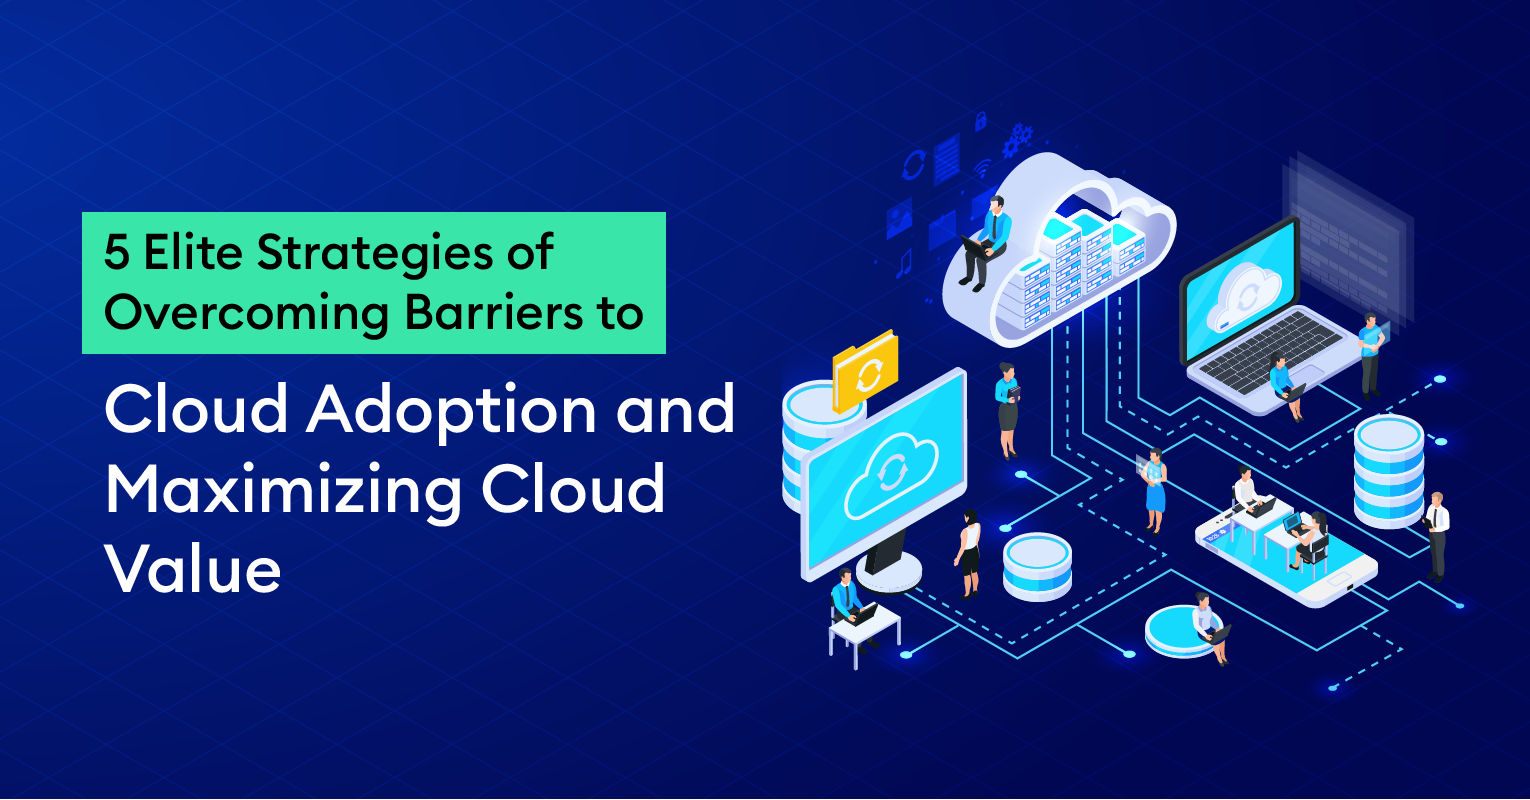 5 Elite Strategies of Overcoming Barriers to Cloud Adoption and Maximizing Cloud Value